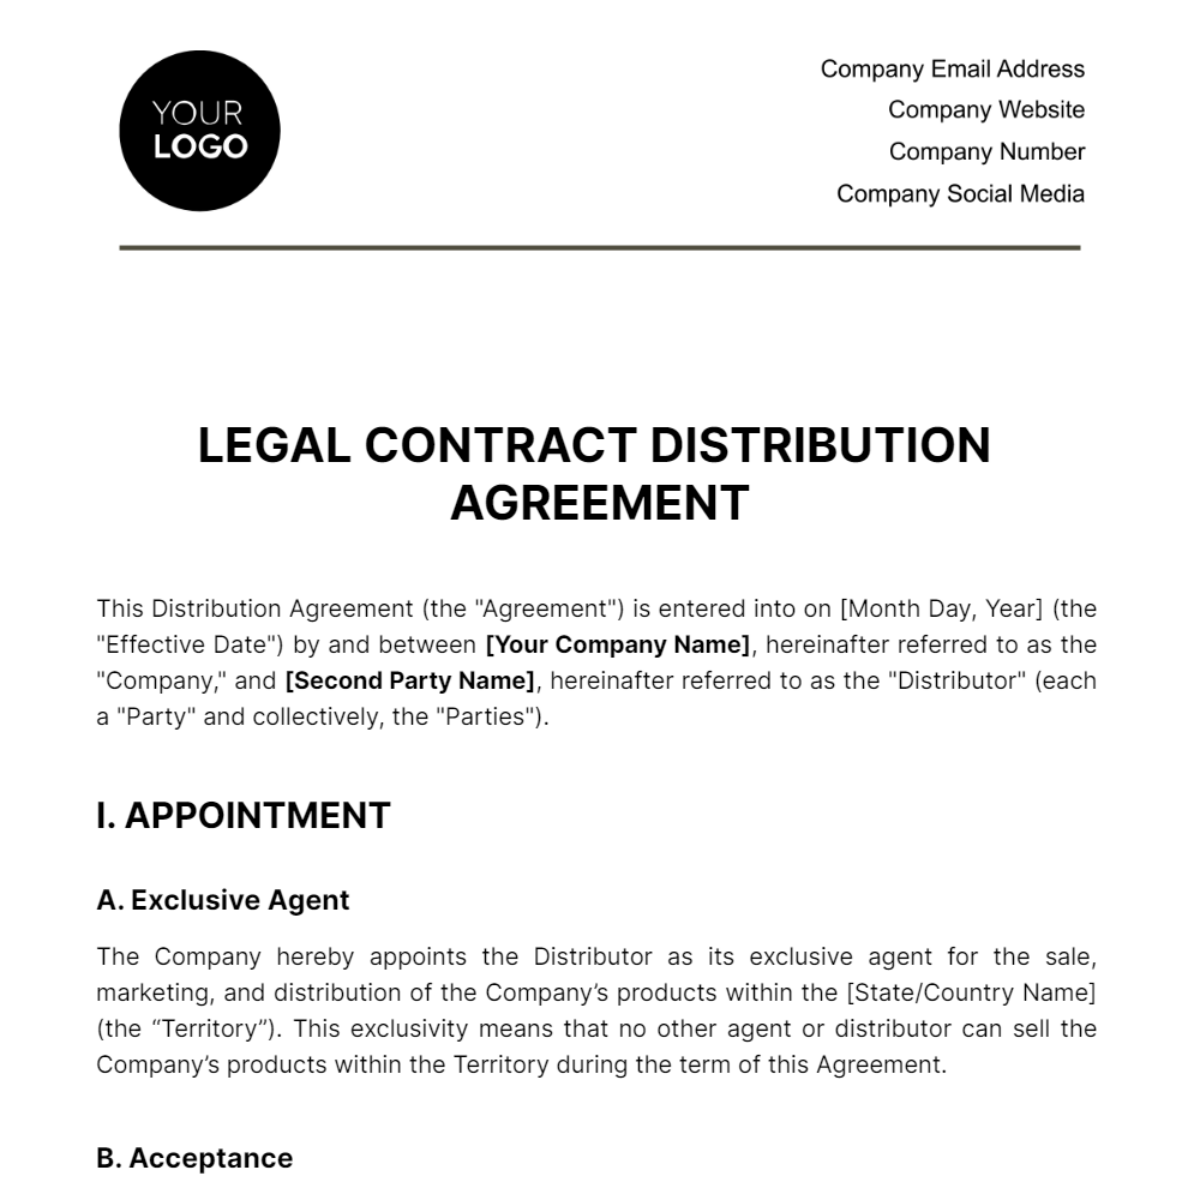 Free Legal Contract Distribution Agreement Template